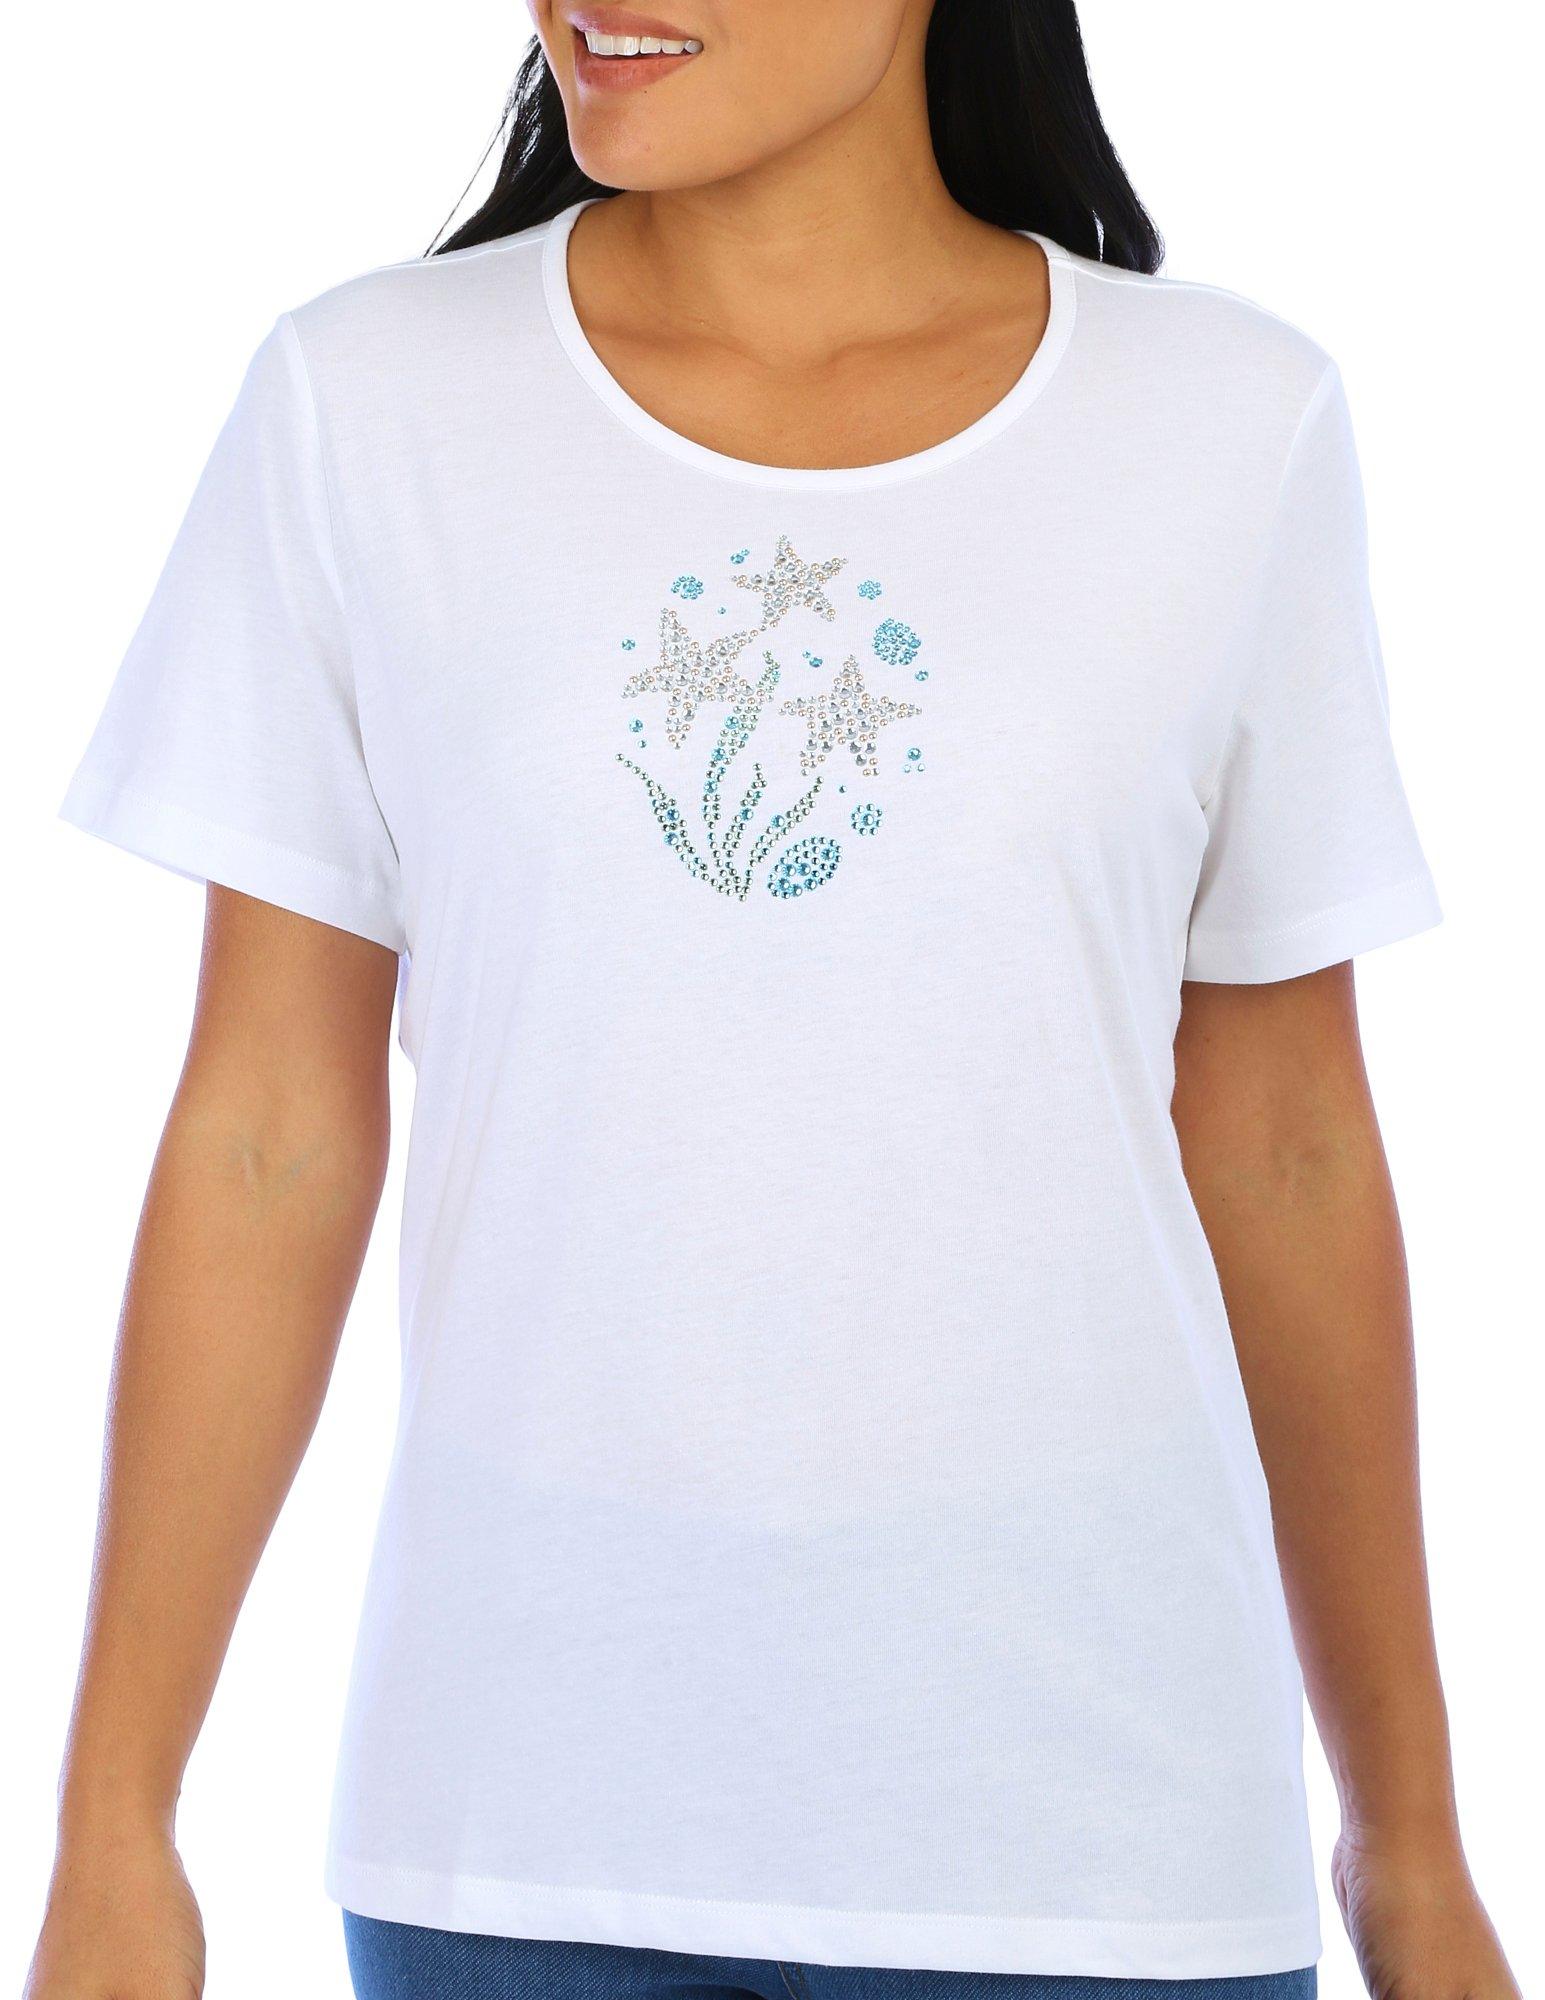 Coral Bay Womens Embellished Sea Star Short Sleeve Top